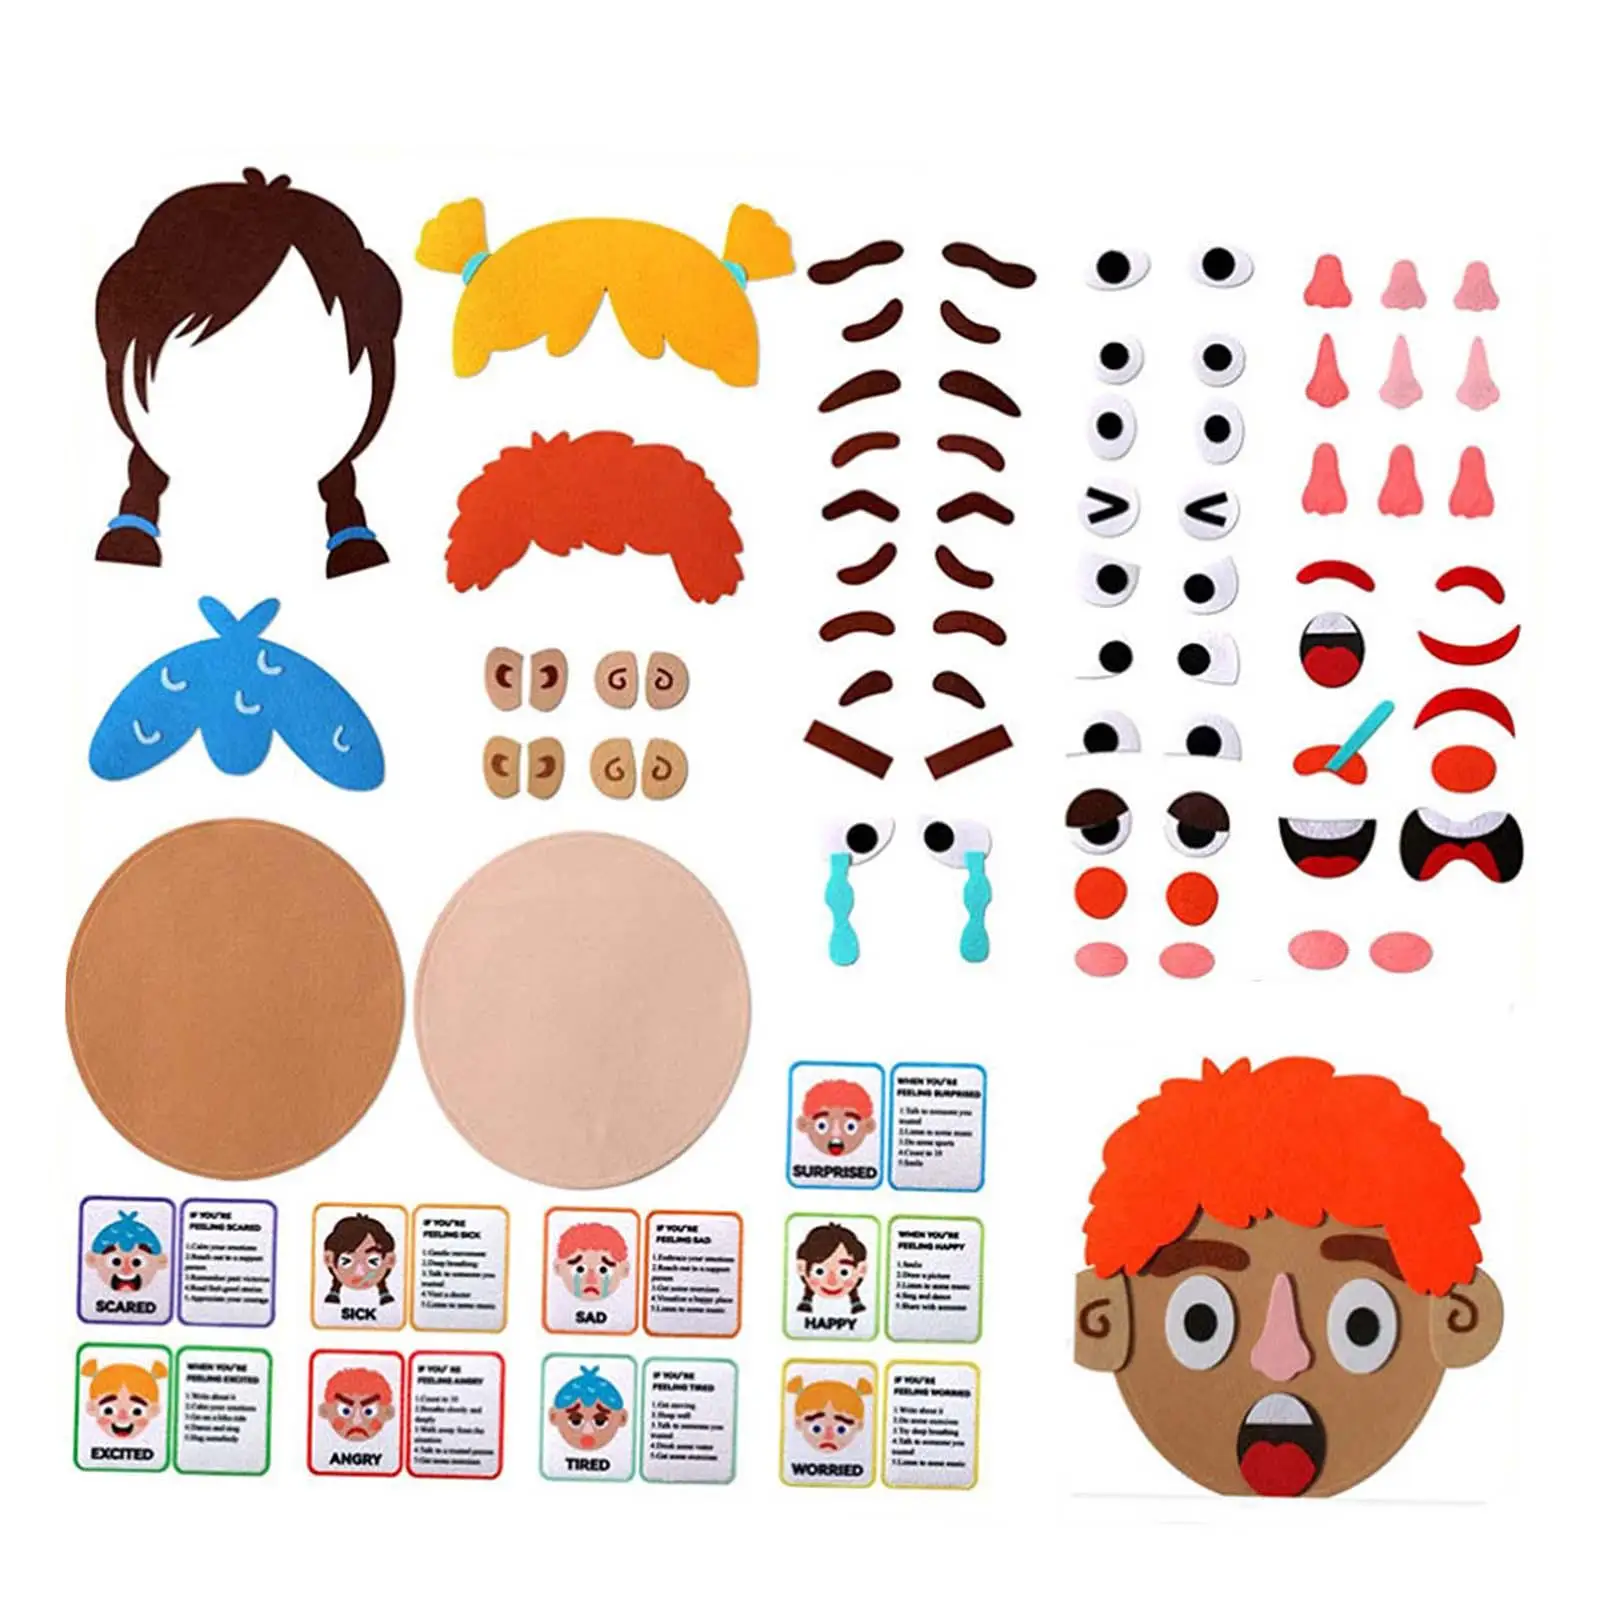 Kids Social Emotional Learning Learning Montessori Funny Faces Games Make A Funny Faces Stickers Games for Girls Boys Toddlers